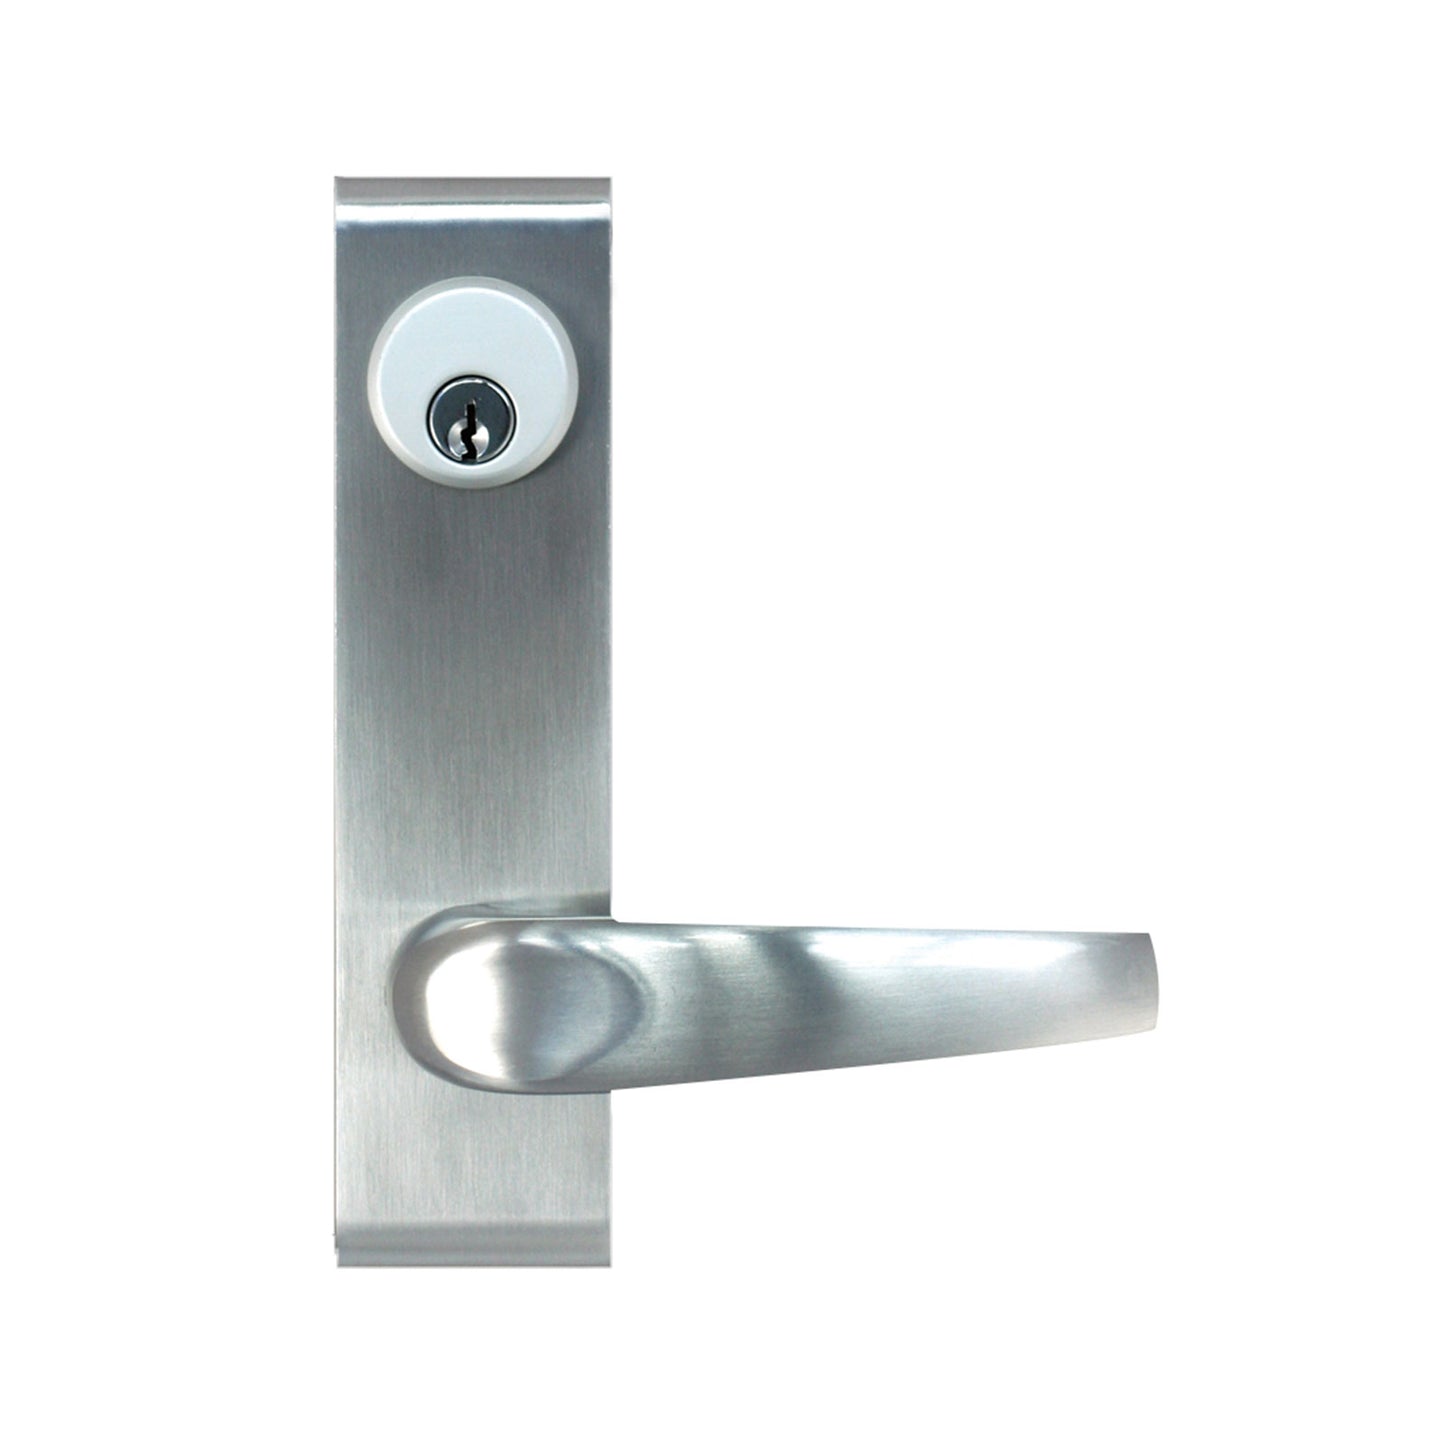 Axim LH-745/LH-725 Outside Handle External Access For Concealed Fire Escape Emergency Exit Bar